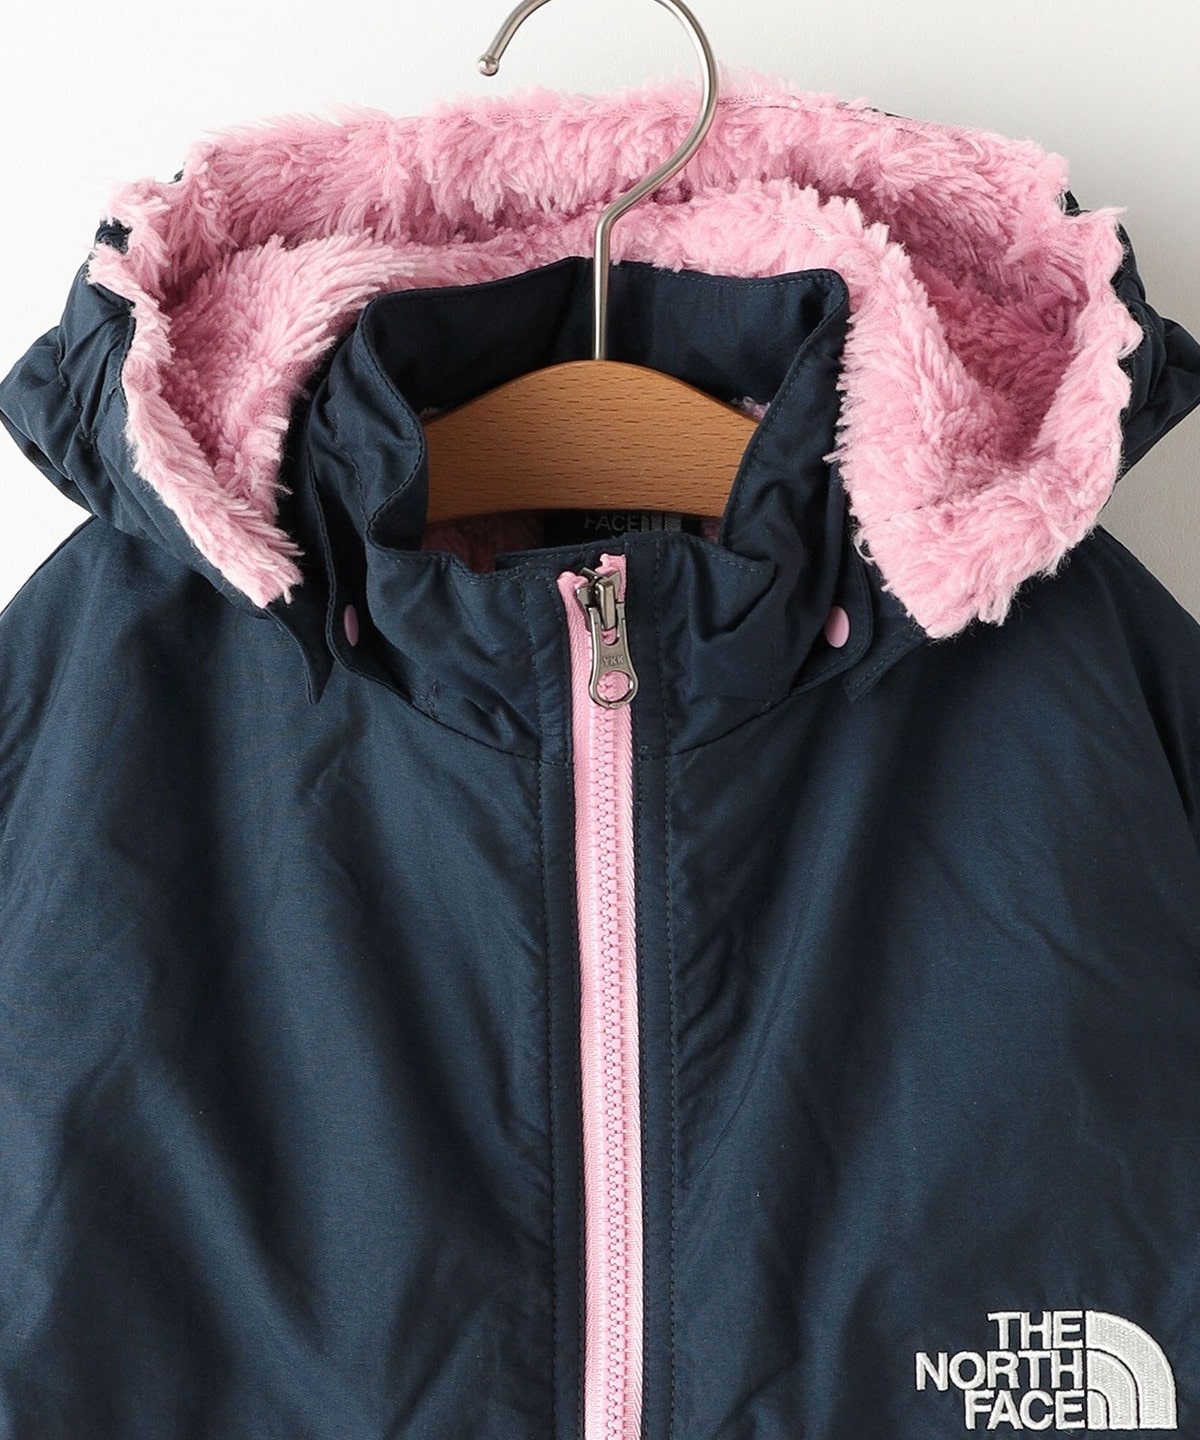 THE NORTH FACE:100～150cm / Compact Nomad Jacket: アウター